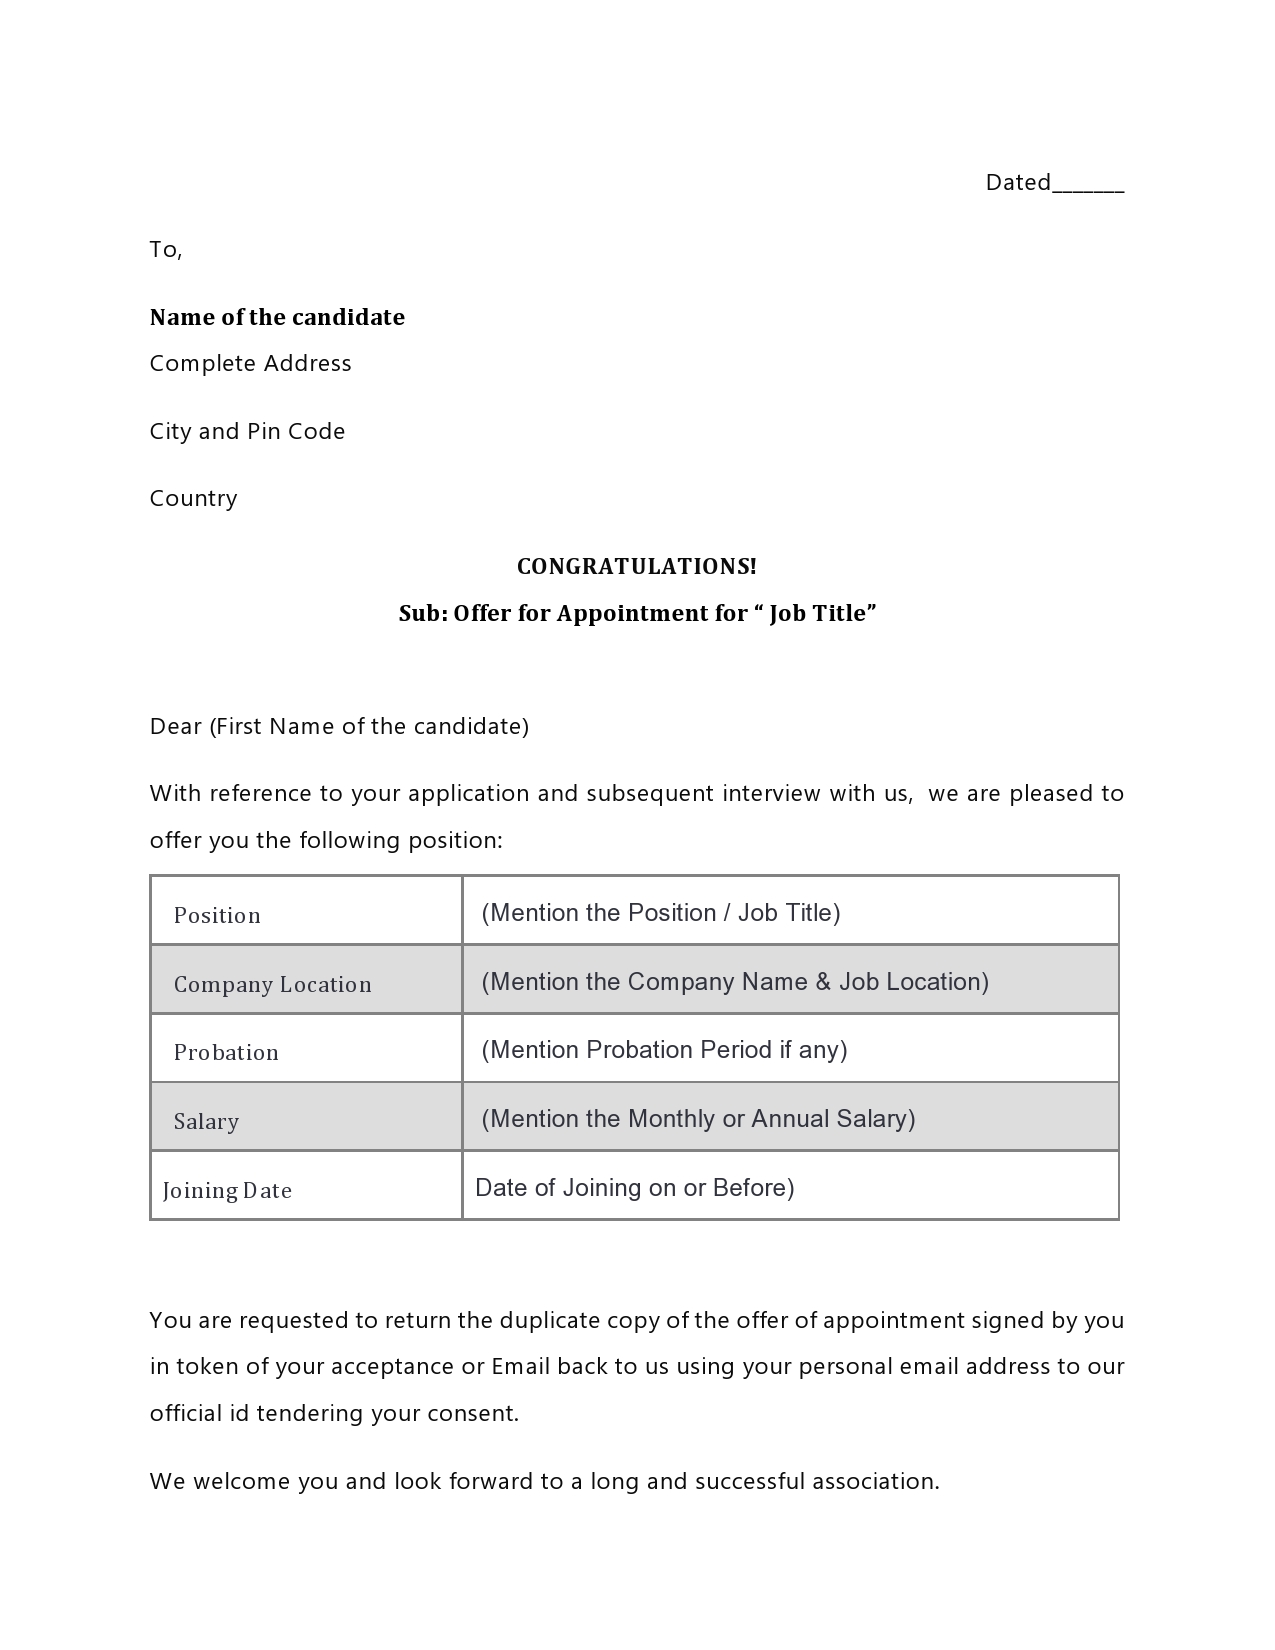 Free employment offer letter template 11